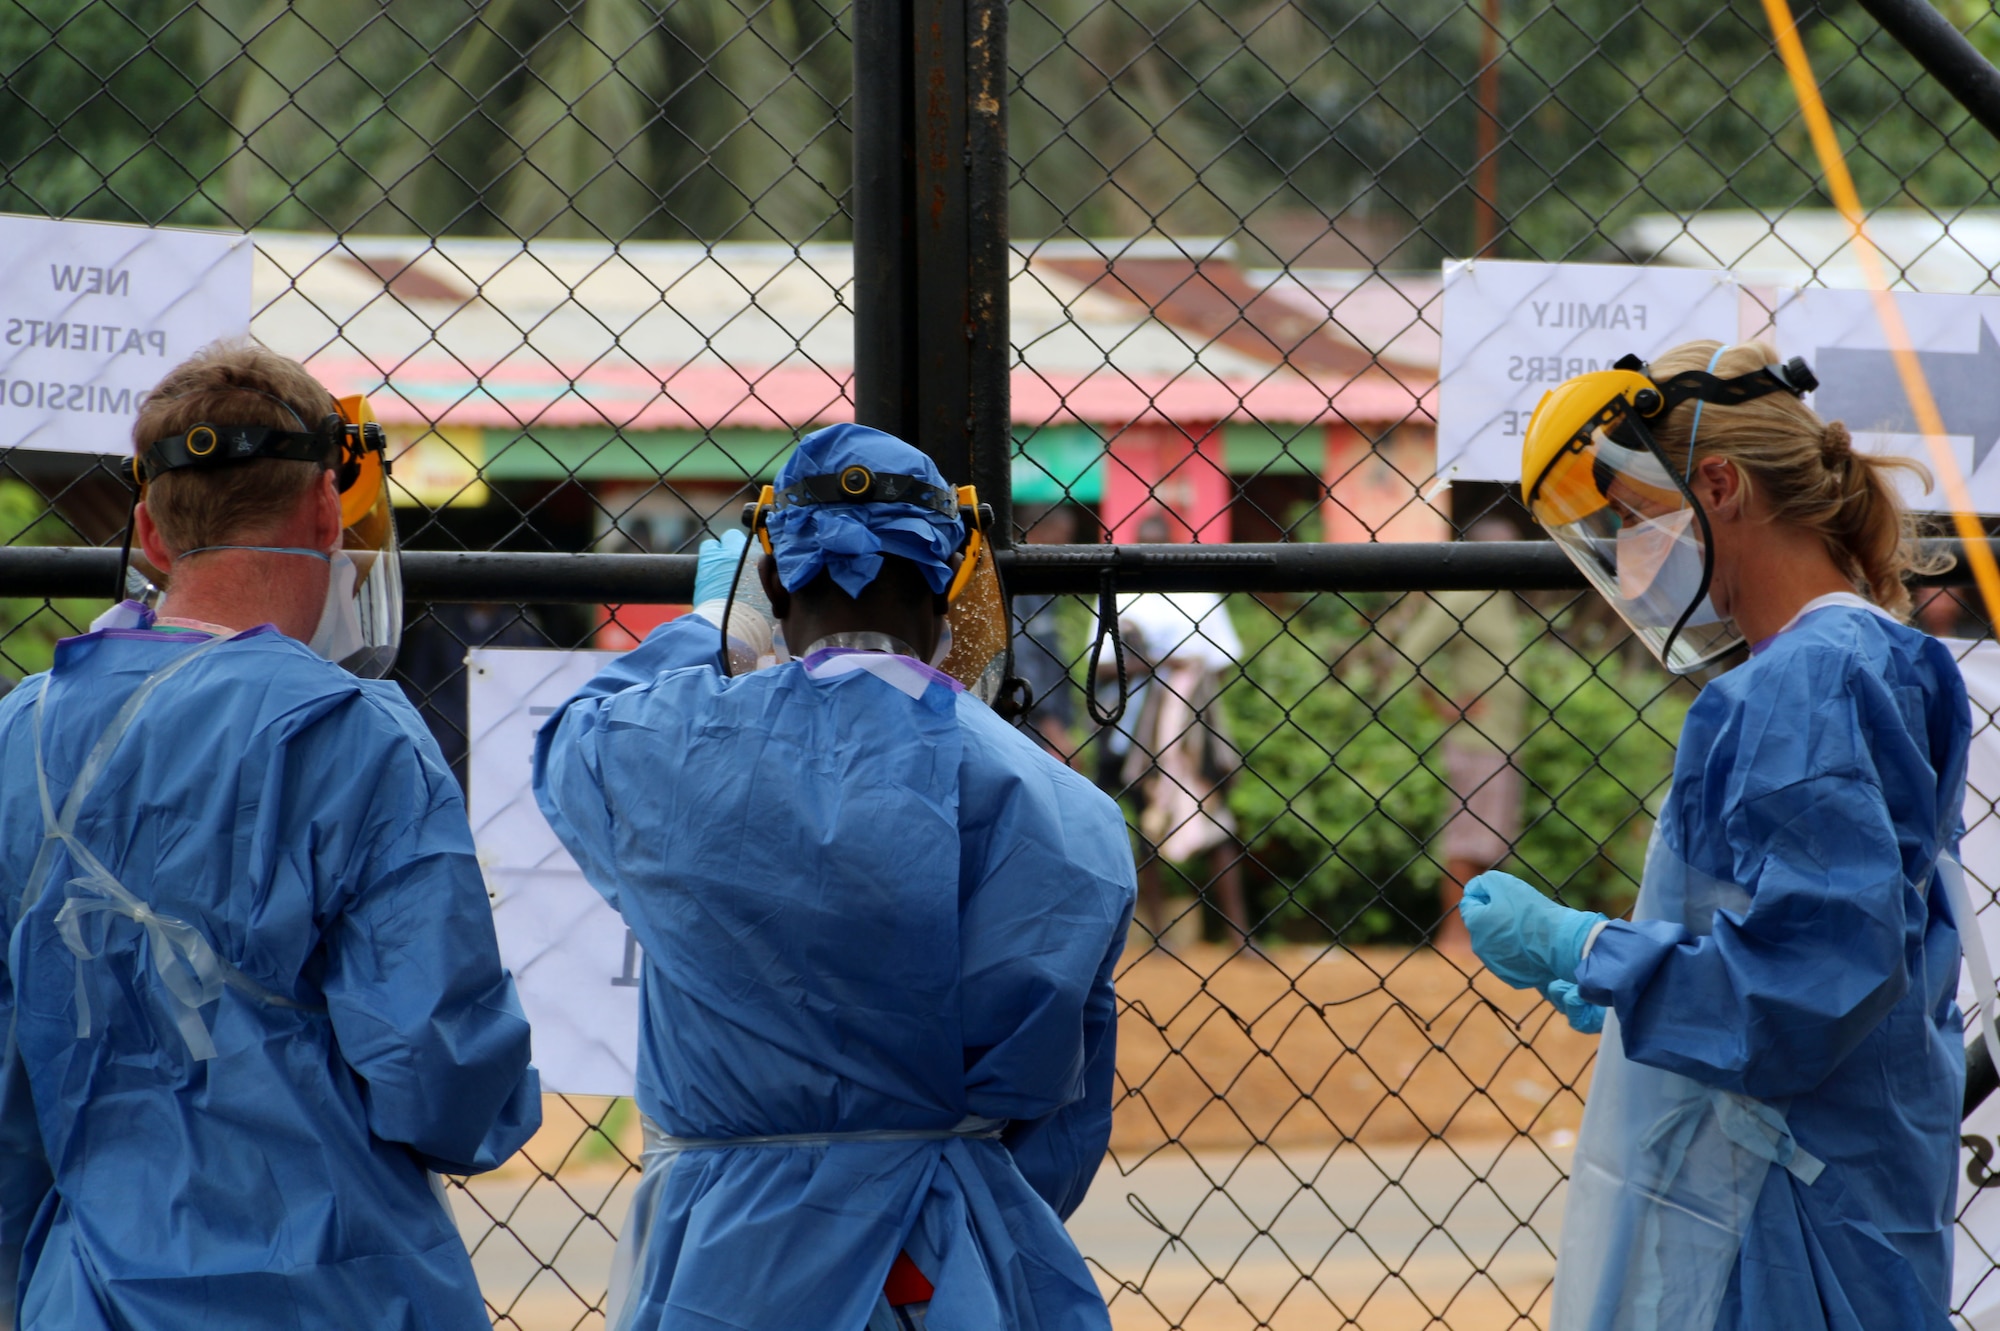 A group of health care workers hang signs on a fence at a field hospital Sept. 19, 2014, in Monrovia, Liberia. The workers are among volunteers from around the world fighting the epidemic outbreak of Ebola. (U.S. Air Force photo/Maj. Francis Obuseh)